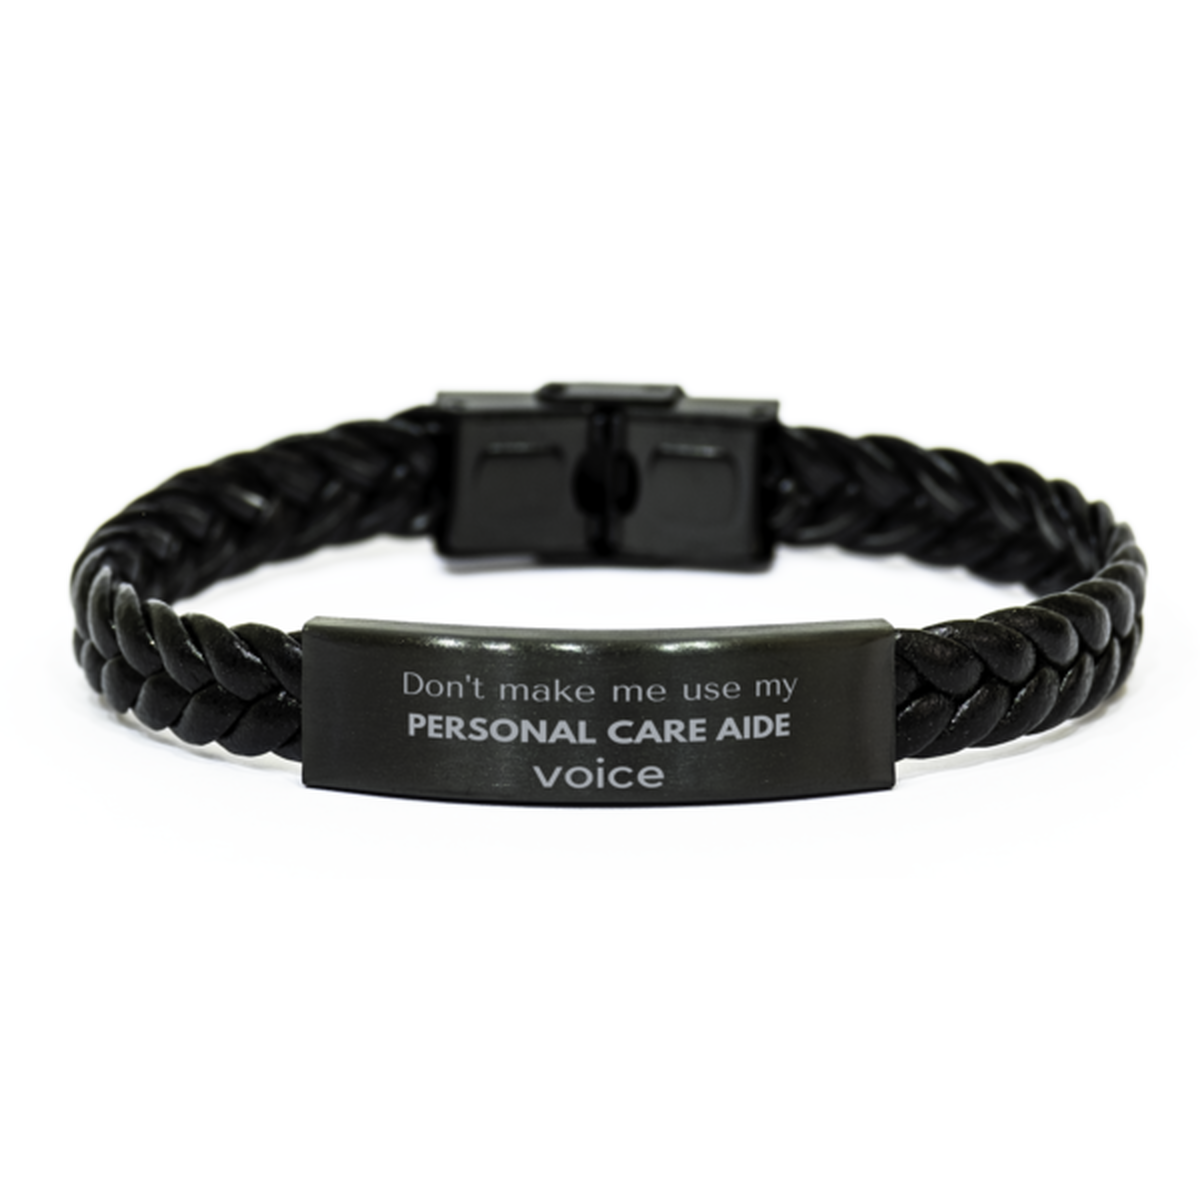 Don't make me use my Personal Care Aide voice, Sarcasm Personal Care Aide Gifts, Christmas Personal Care Aide Braided Leather Bracelet Birthday Unique Gifts For Personal Care Aide Coworkers, Men, Women, Colleague, Friends